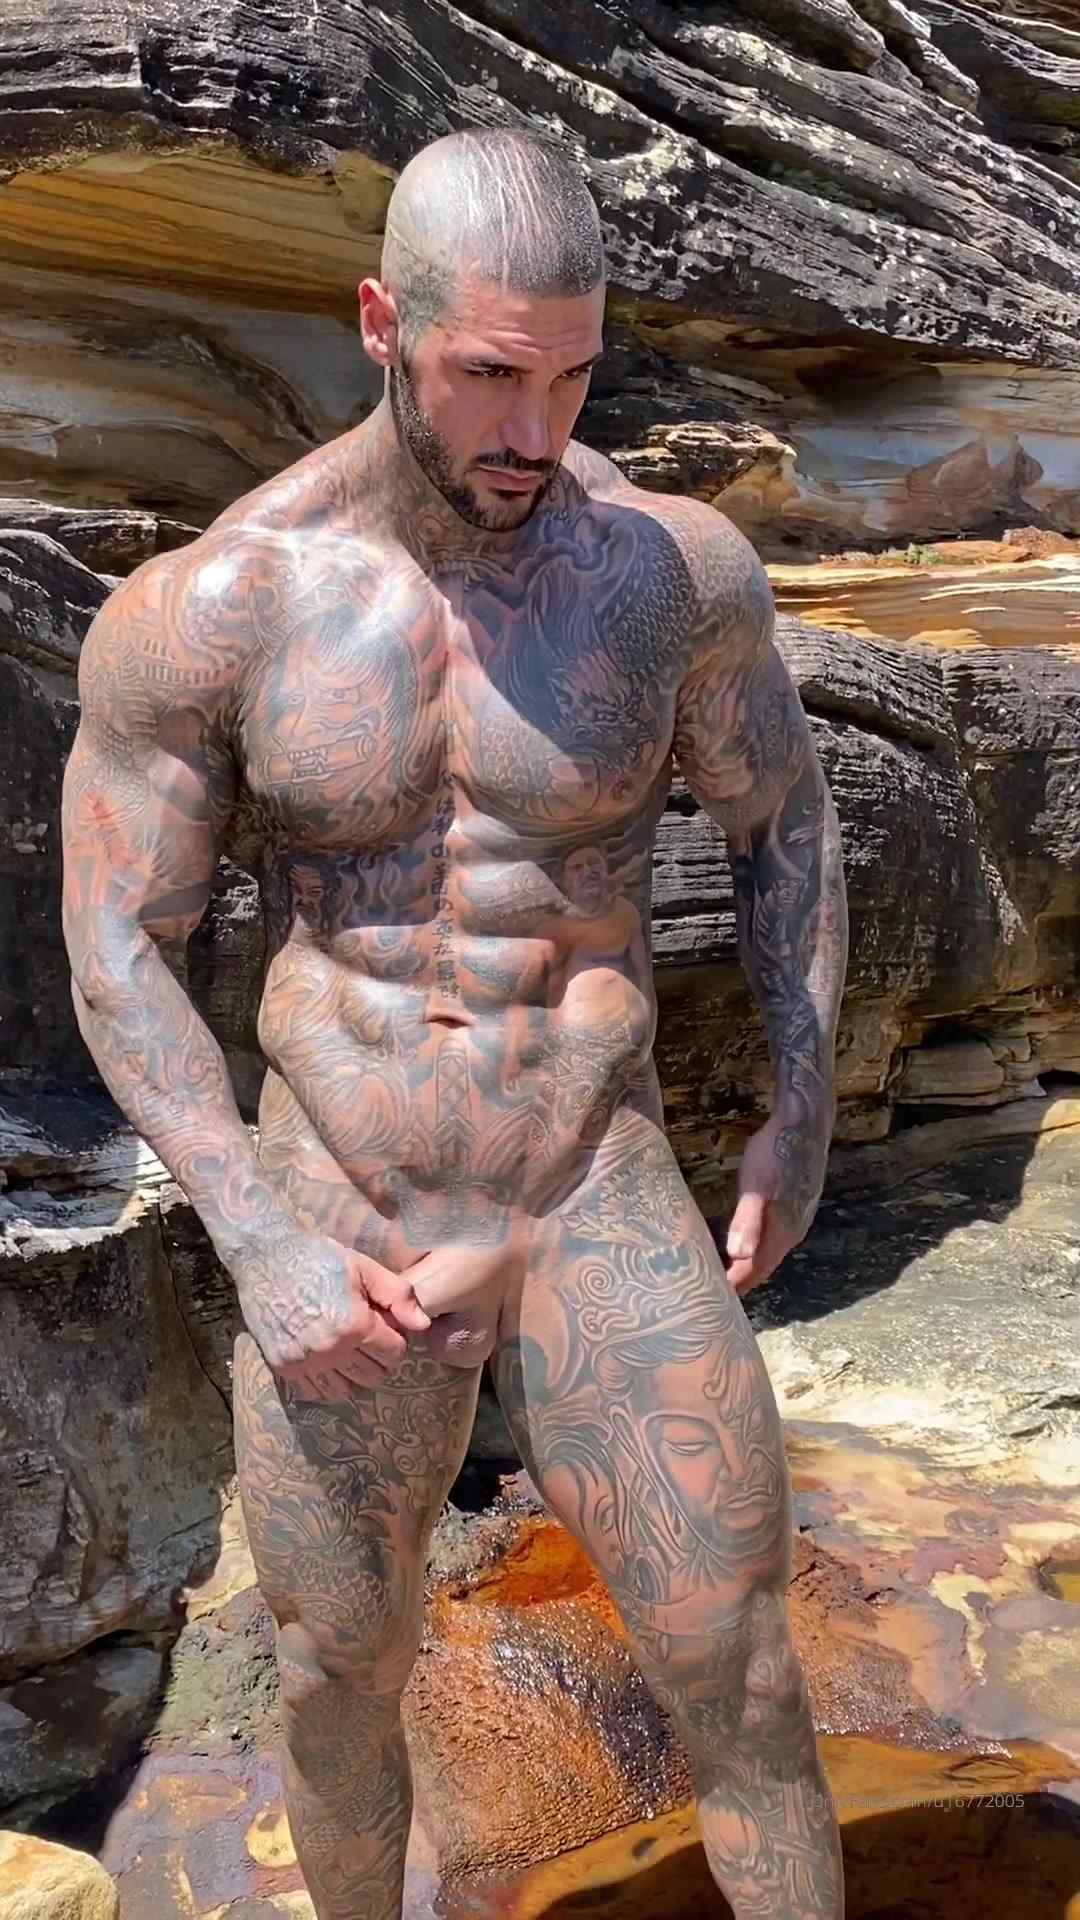 Hot Muslim guy covered in tattoos showing off his body and cock at the beach